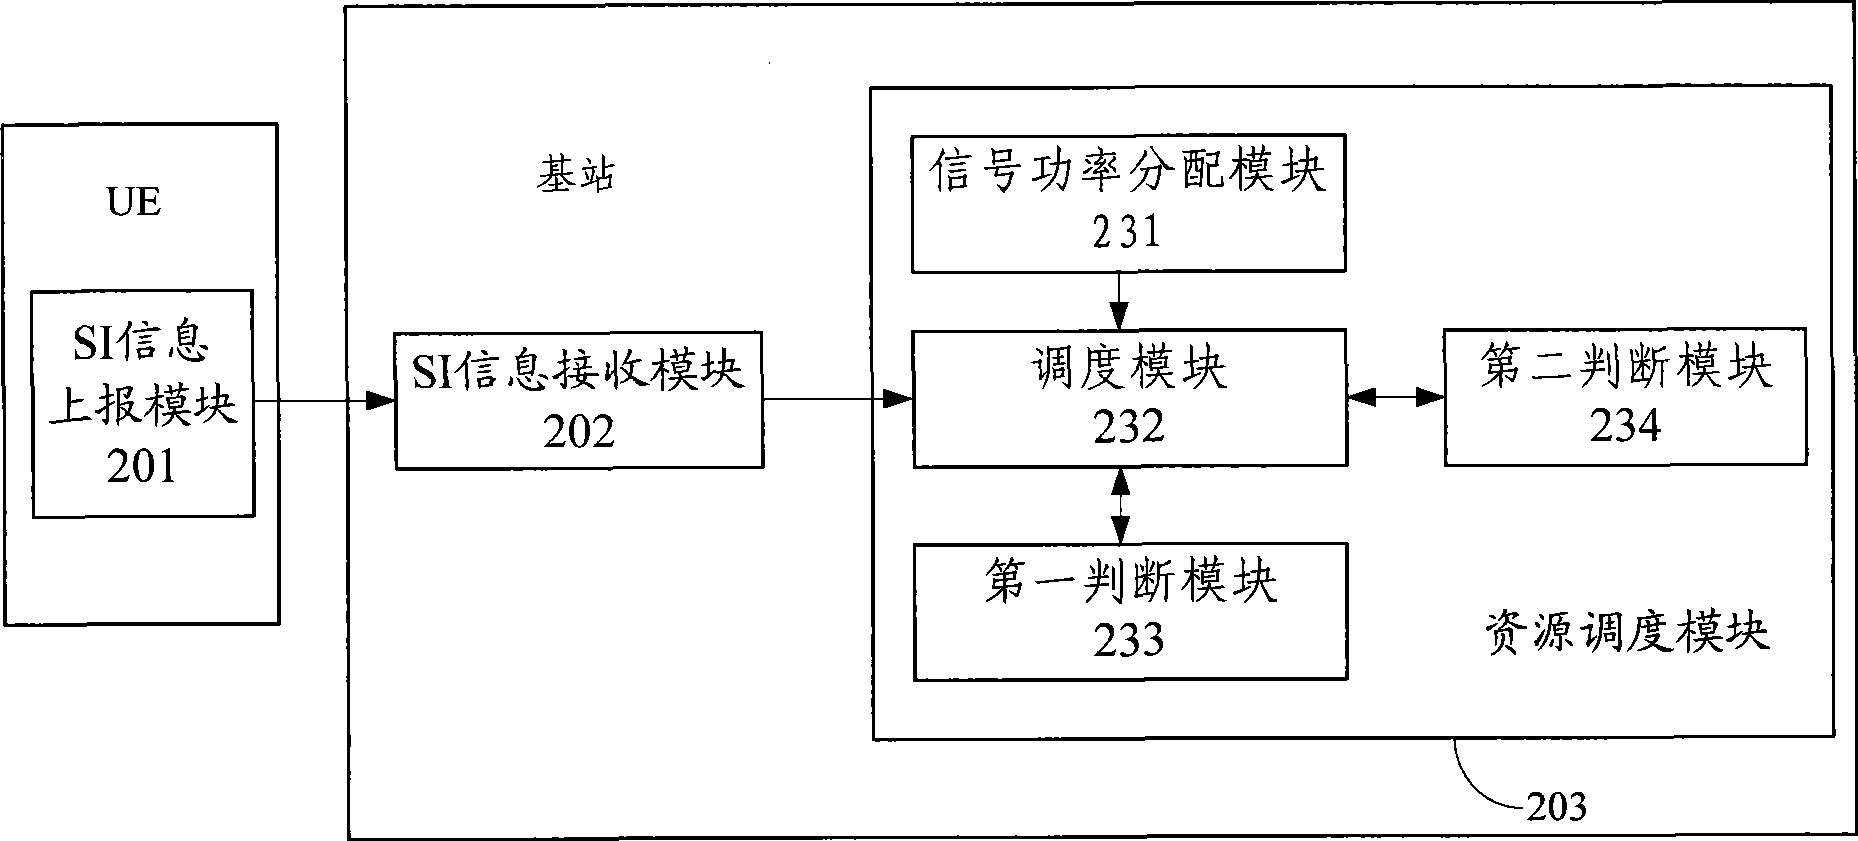 Method and communication system for scheduling resource through scheduling information